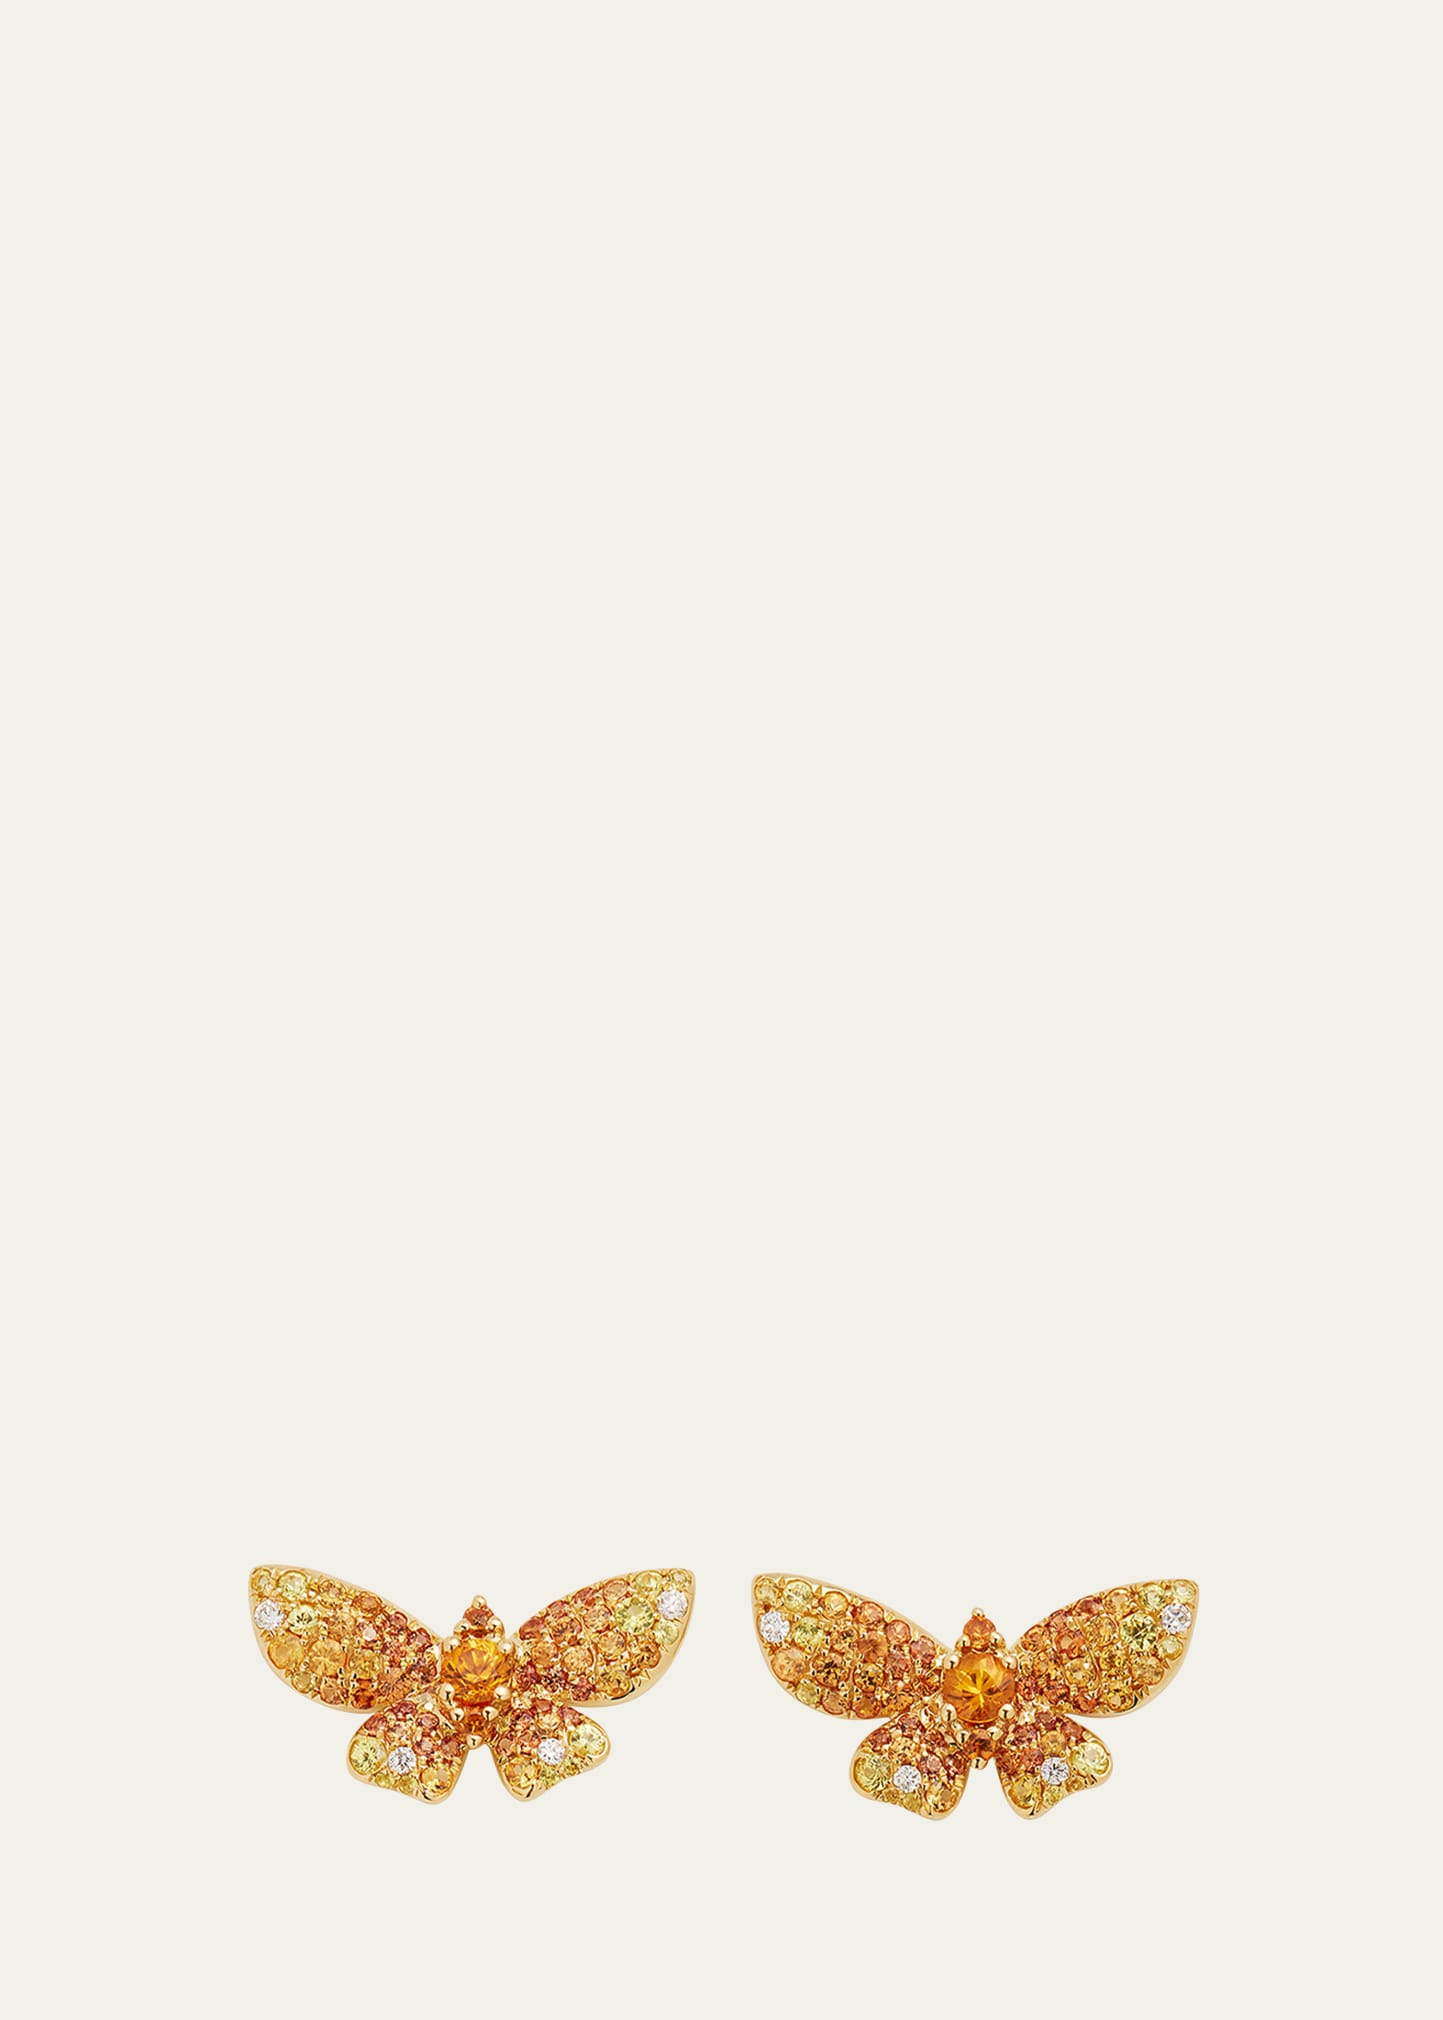 Yellow Gold Yellow Sapphire and White Diamond Earrings from The Butterfly Collection